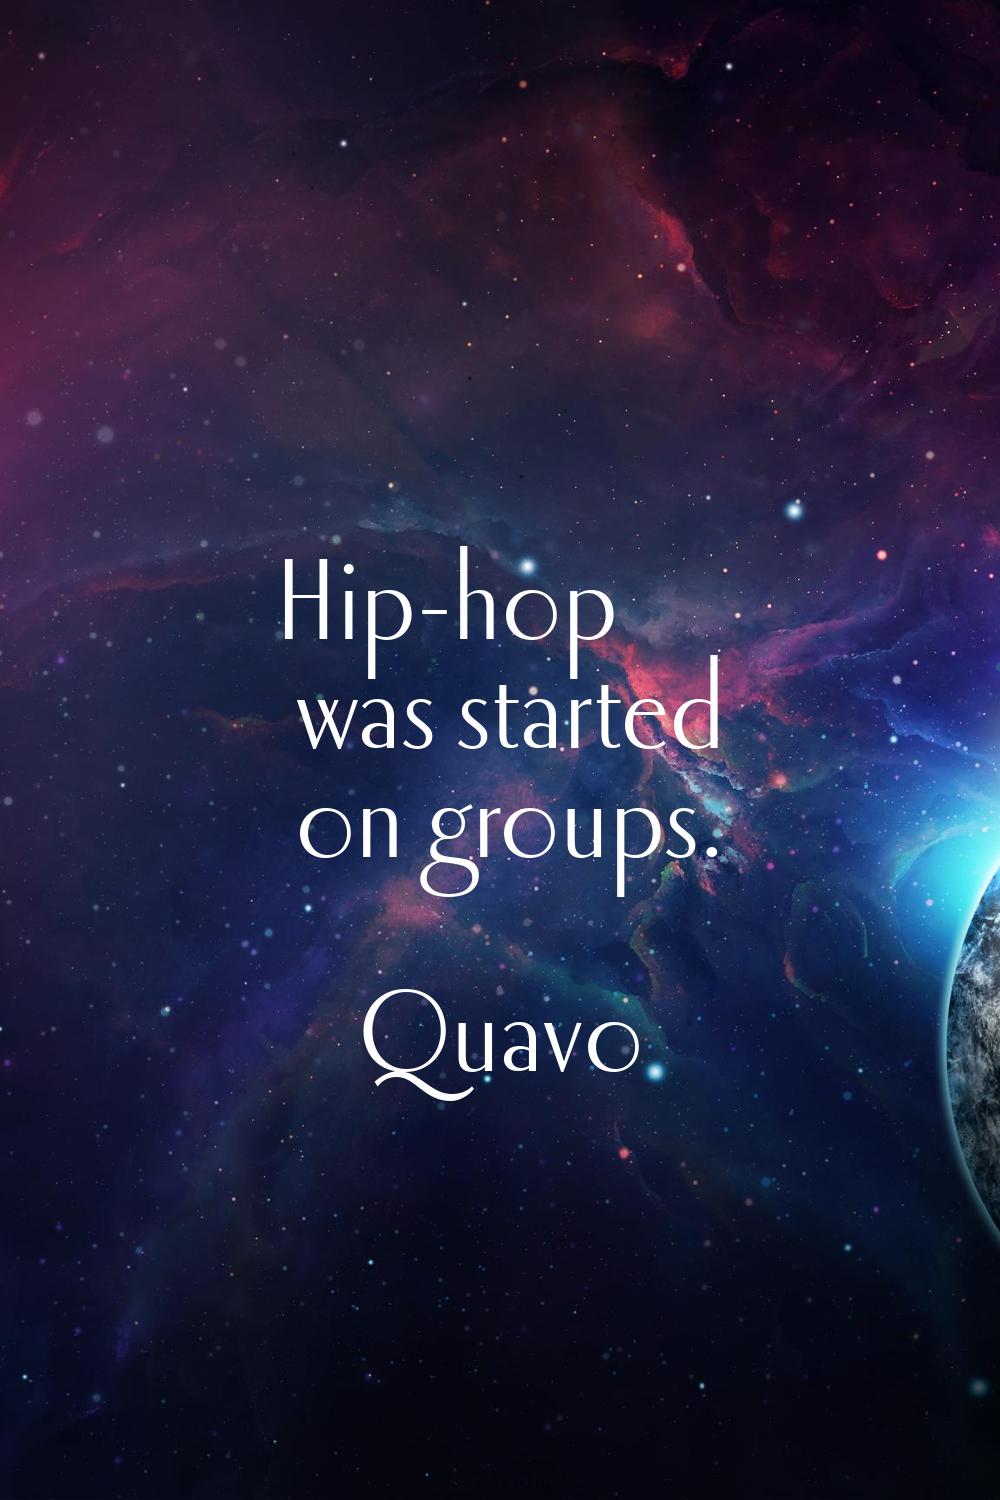 Hip-hop was started on groups.